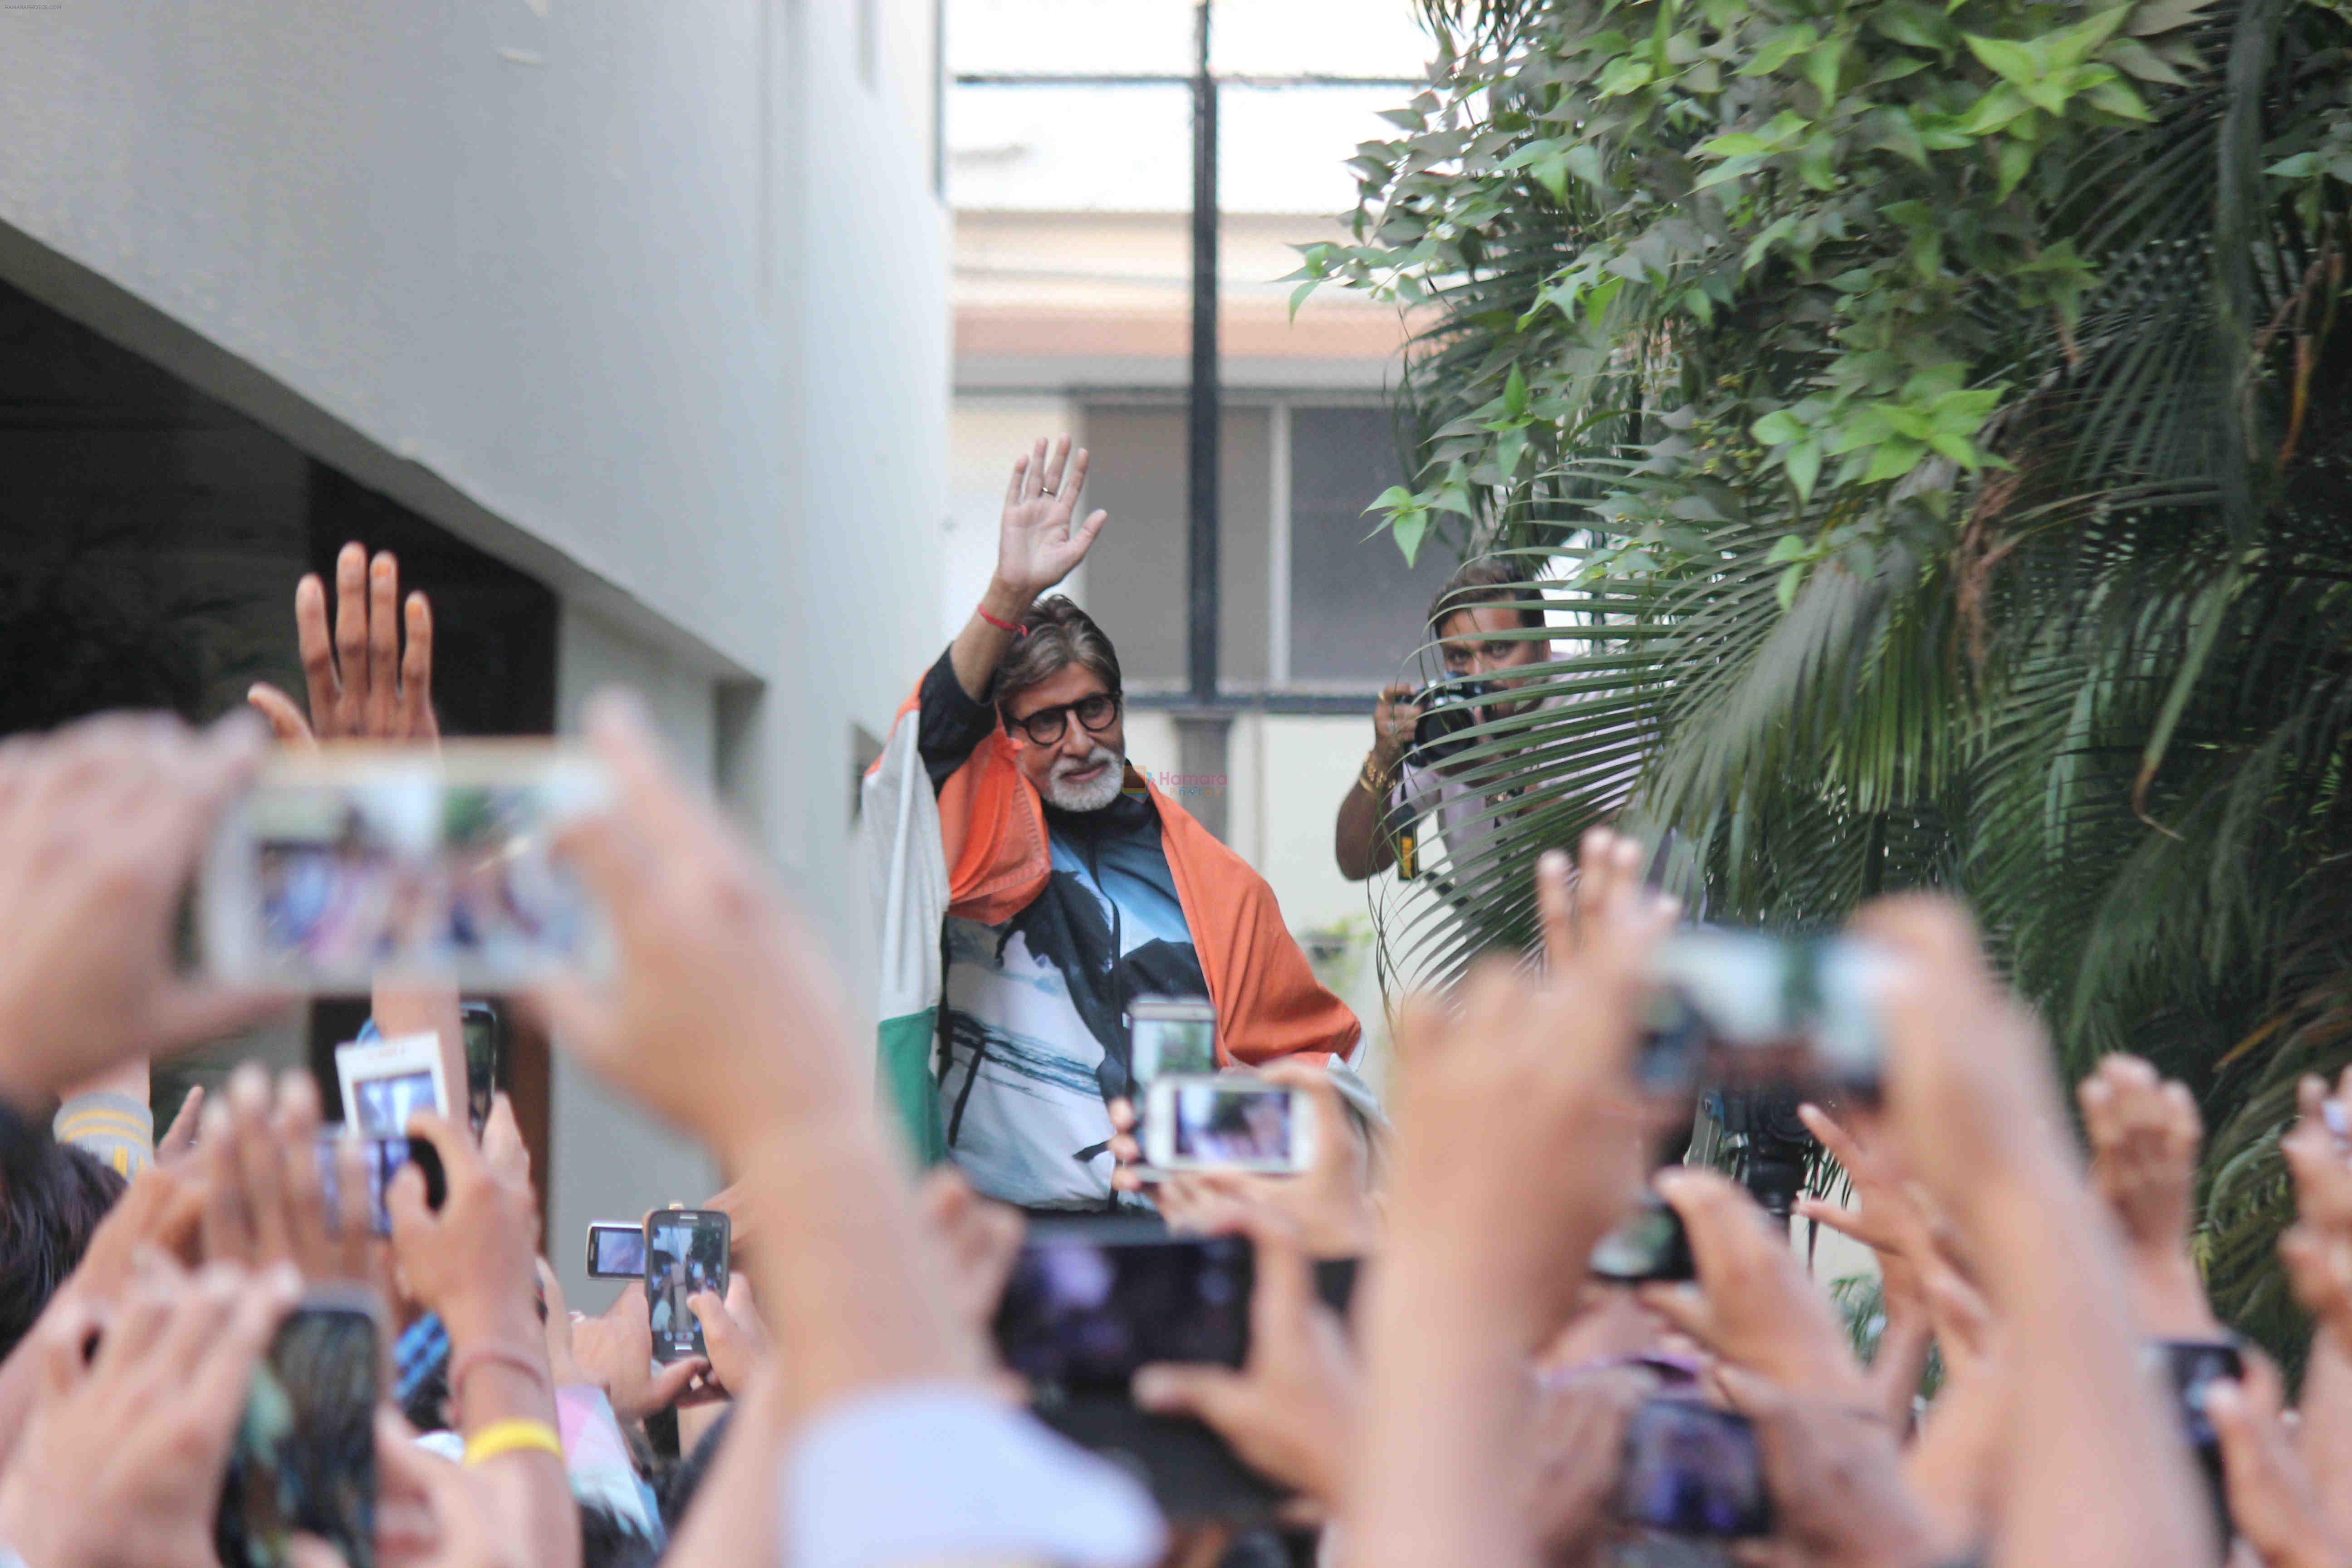 Amitabh Bachchan celebrates with fans India's world cup win over Pakistan at his residence Jalsa in Mumbai on 15th Feb 2015